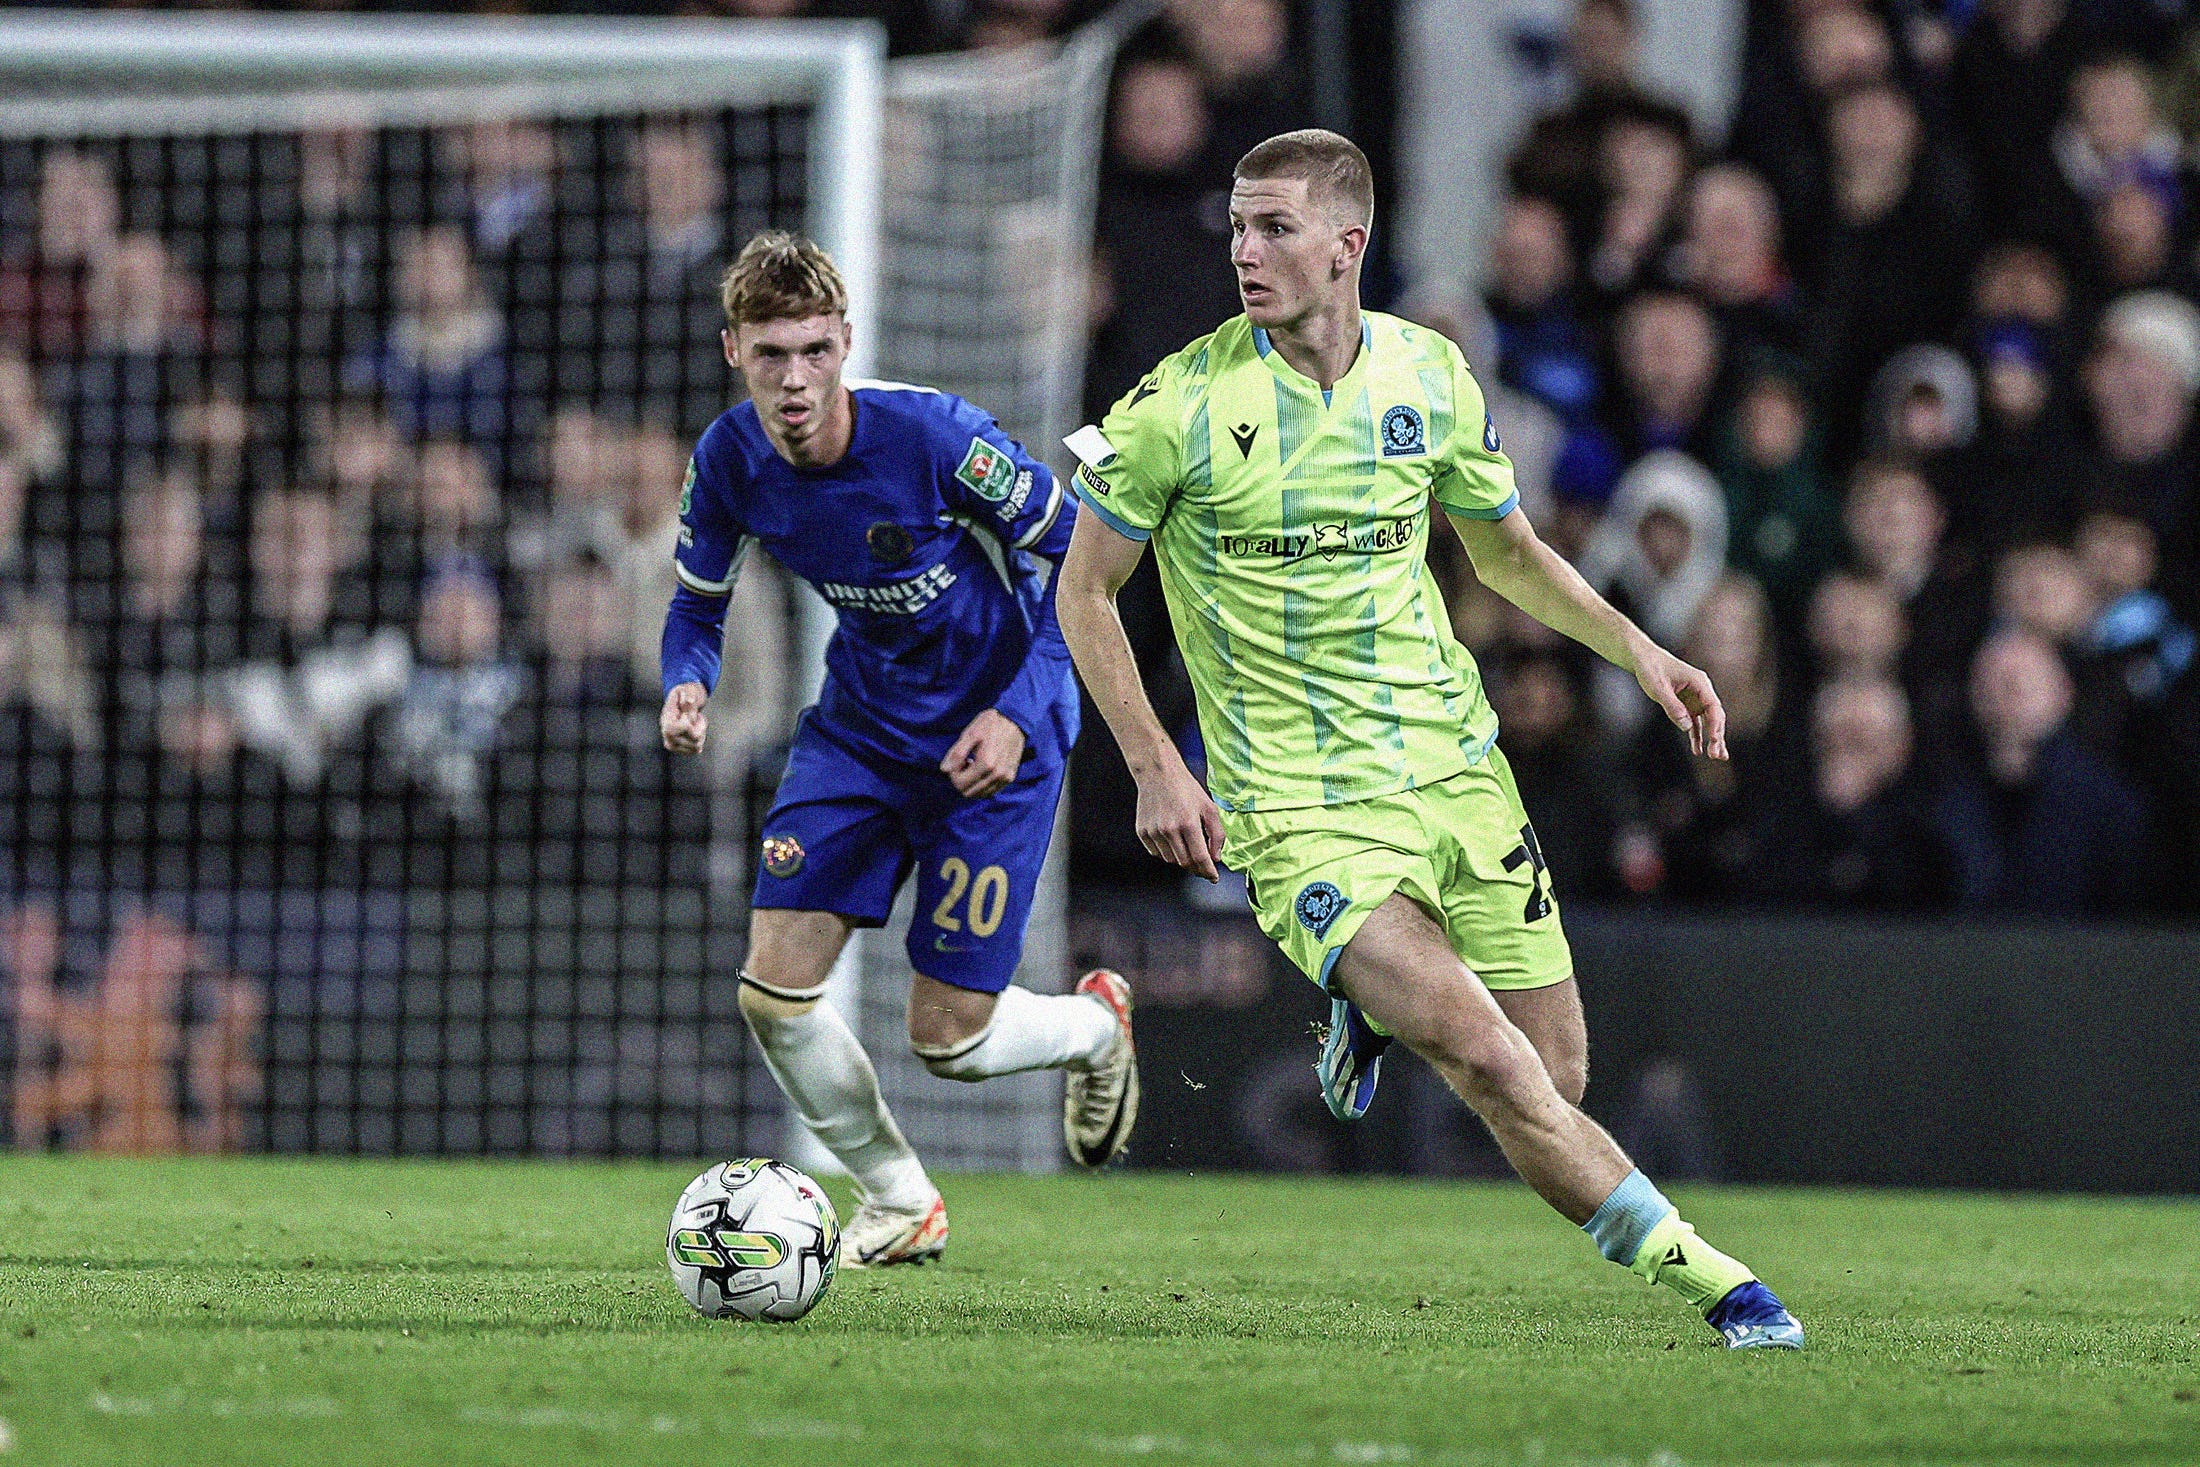 A photo of Adam Wharton playing for Blackburn Rovers against Chelsea wearing a highlighter yellow kit. In the background is Chelsea's Cole Palmer.